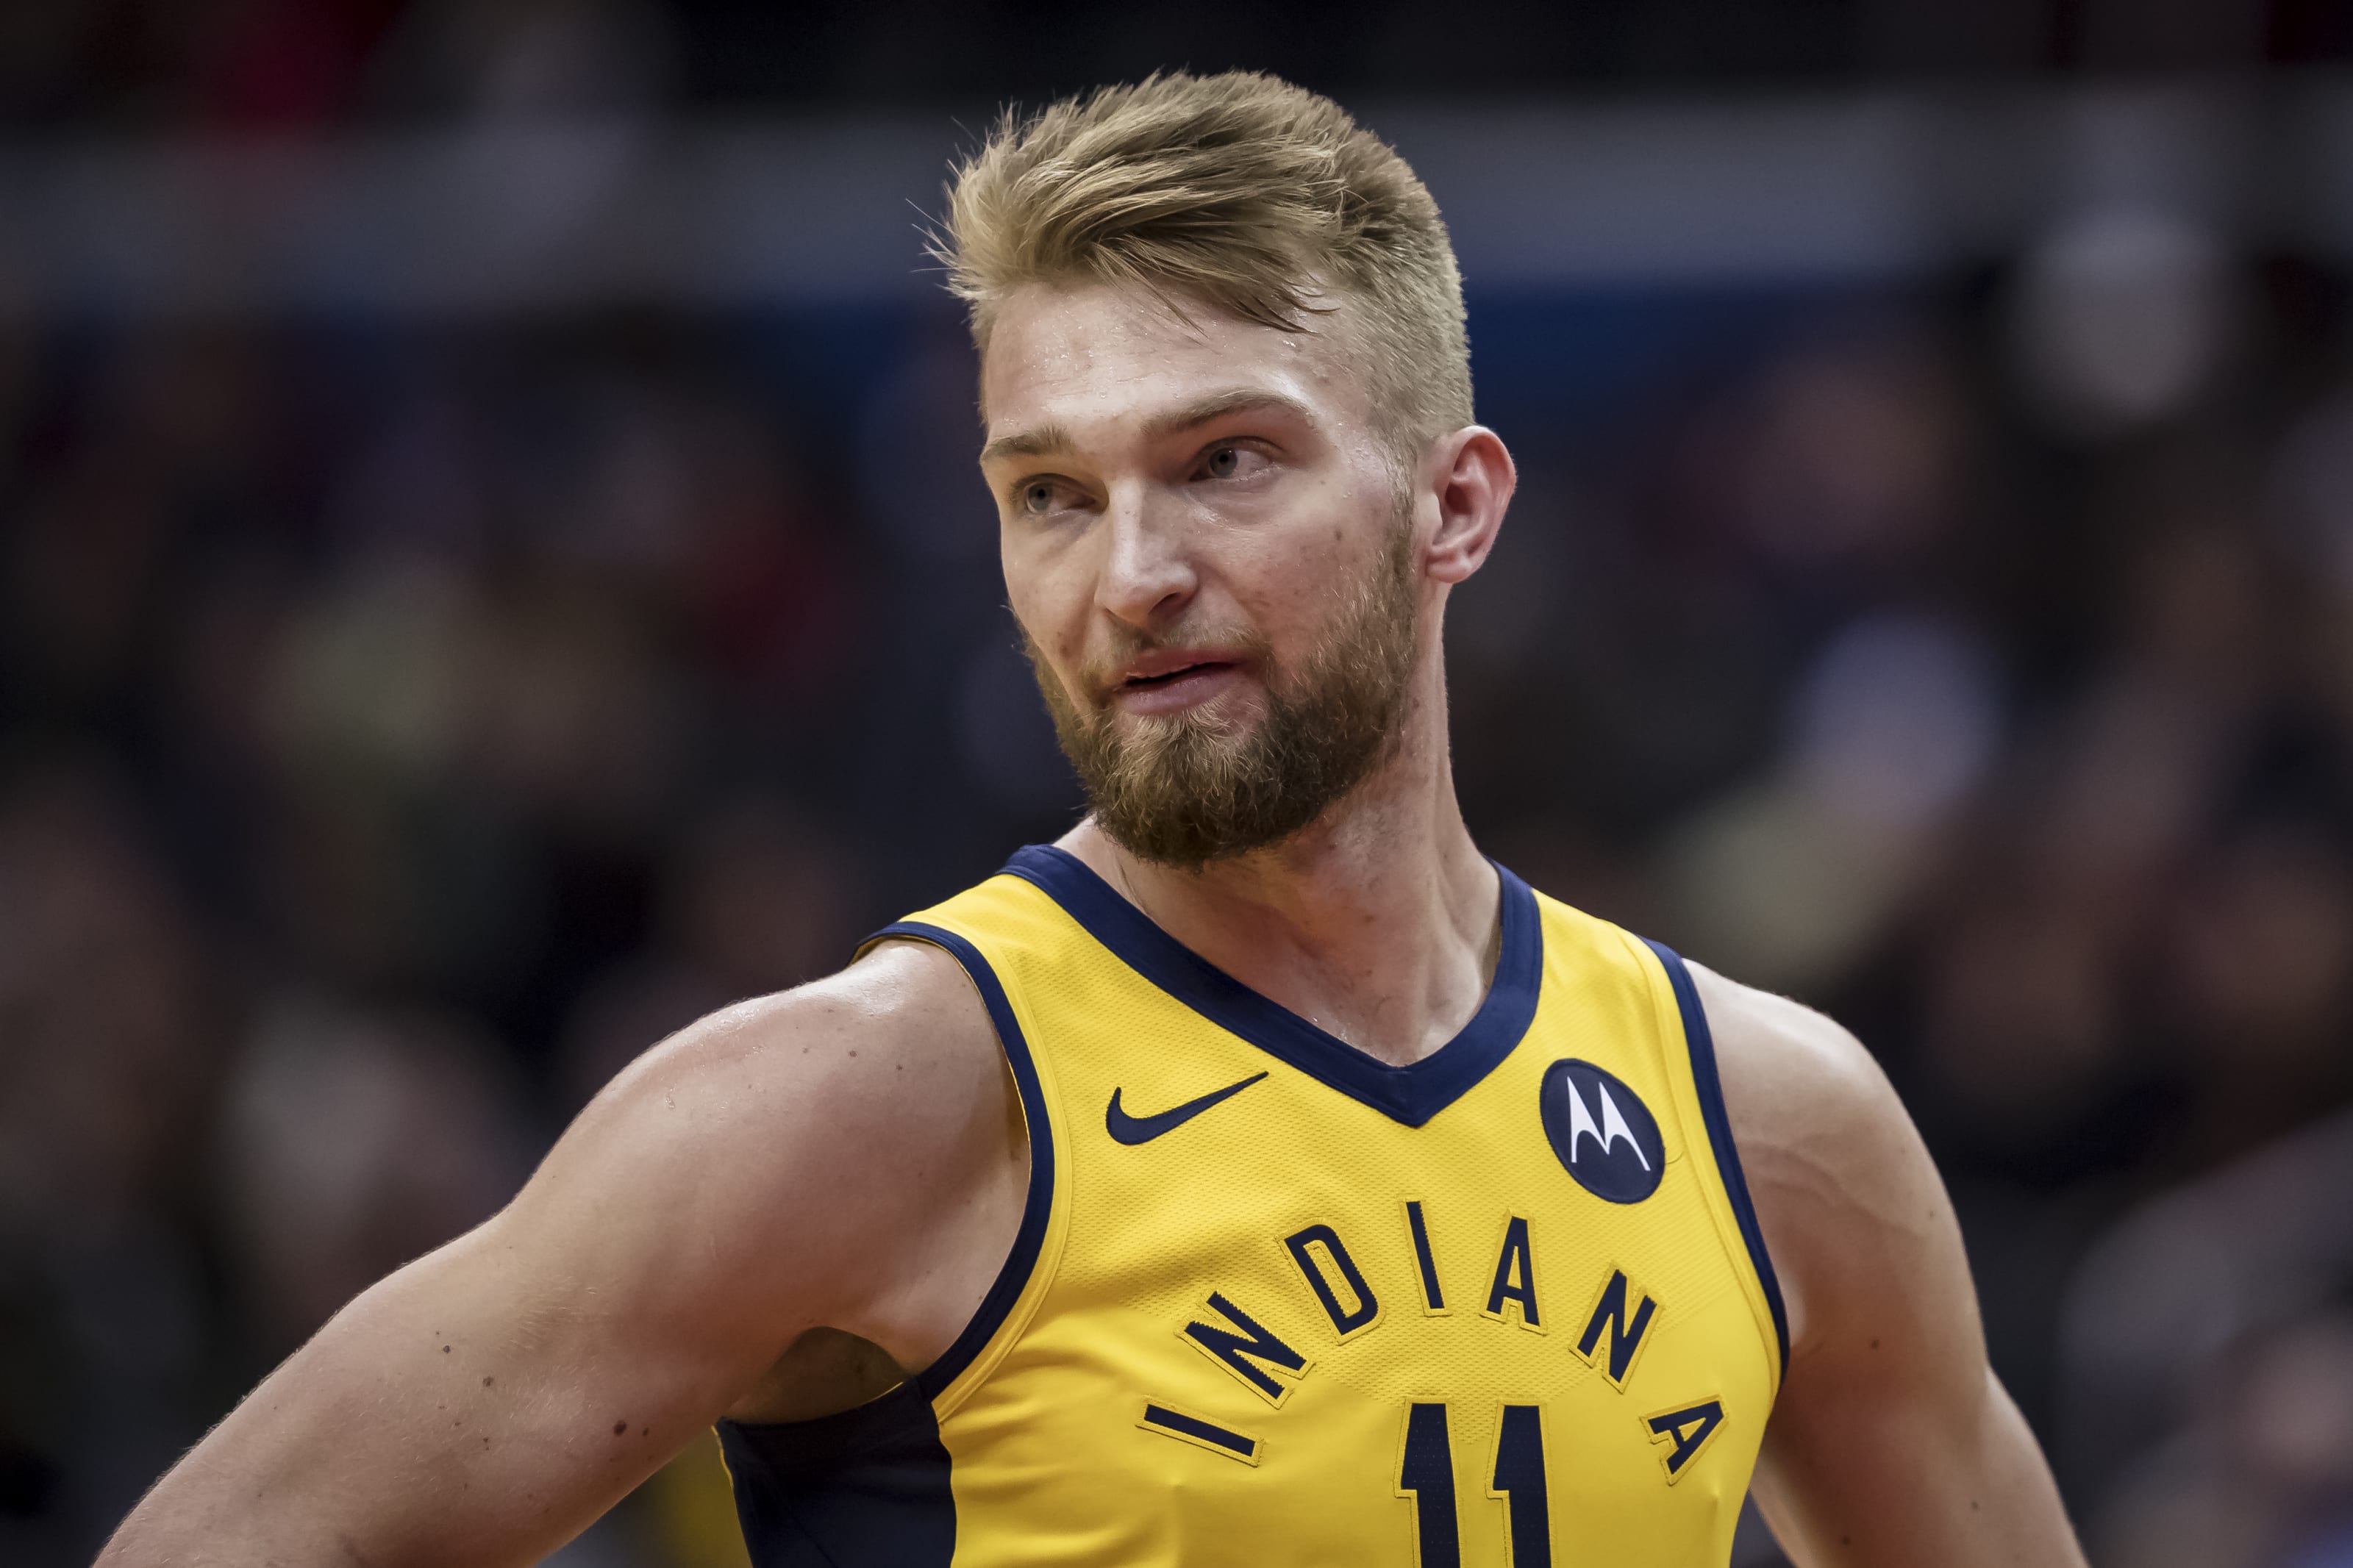 Indiana Pacers Schedule lends itself to quick start